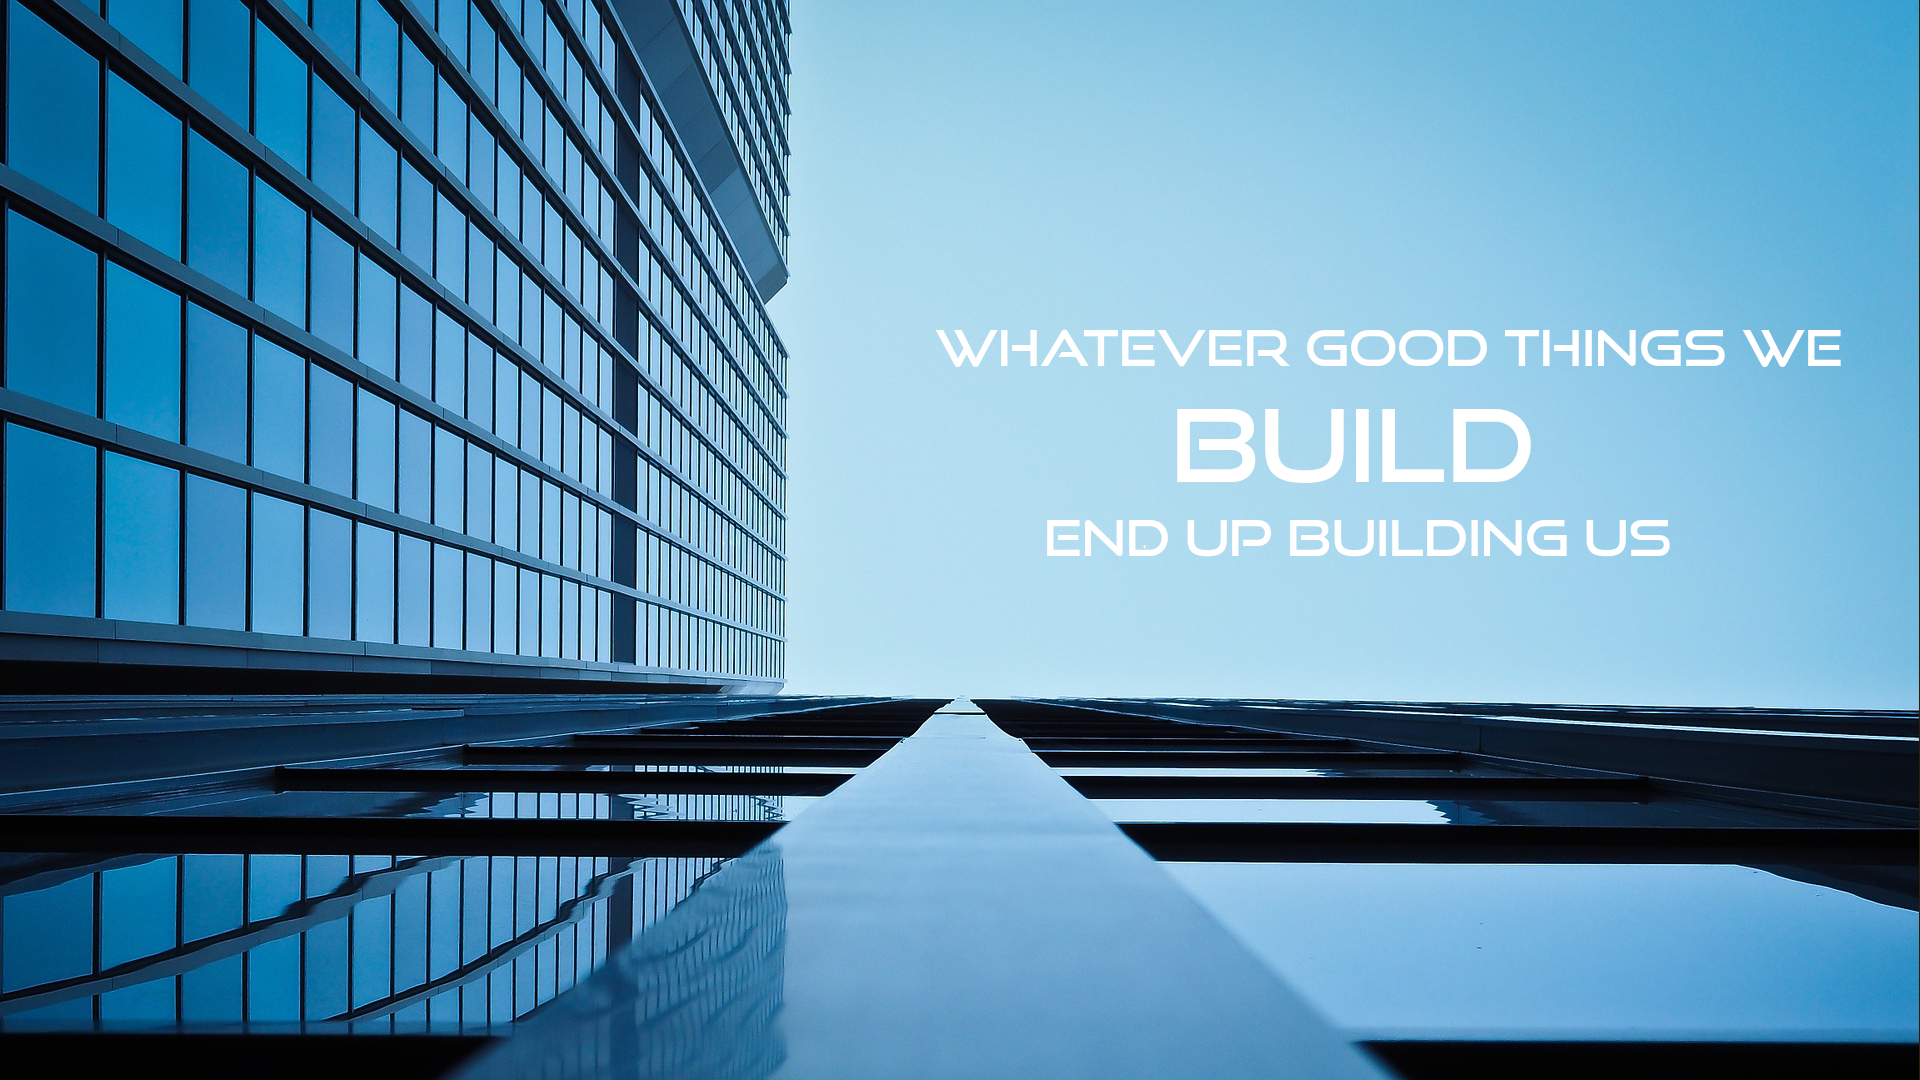 Whatever good things we build end up building us